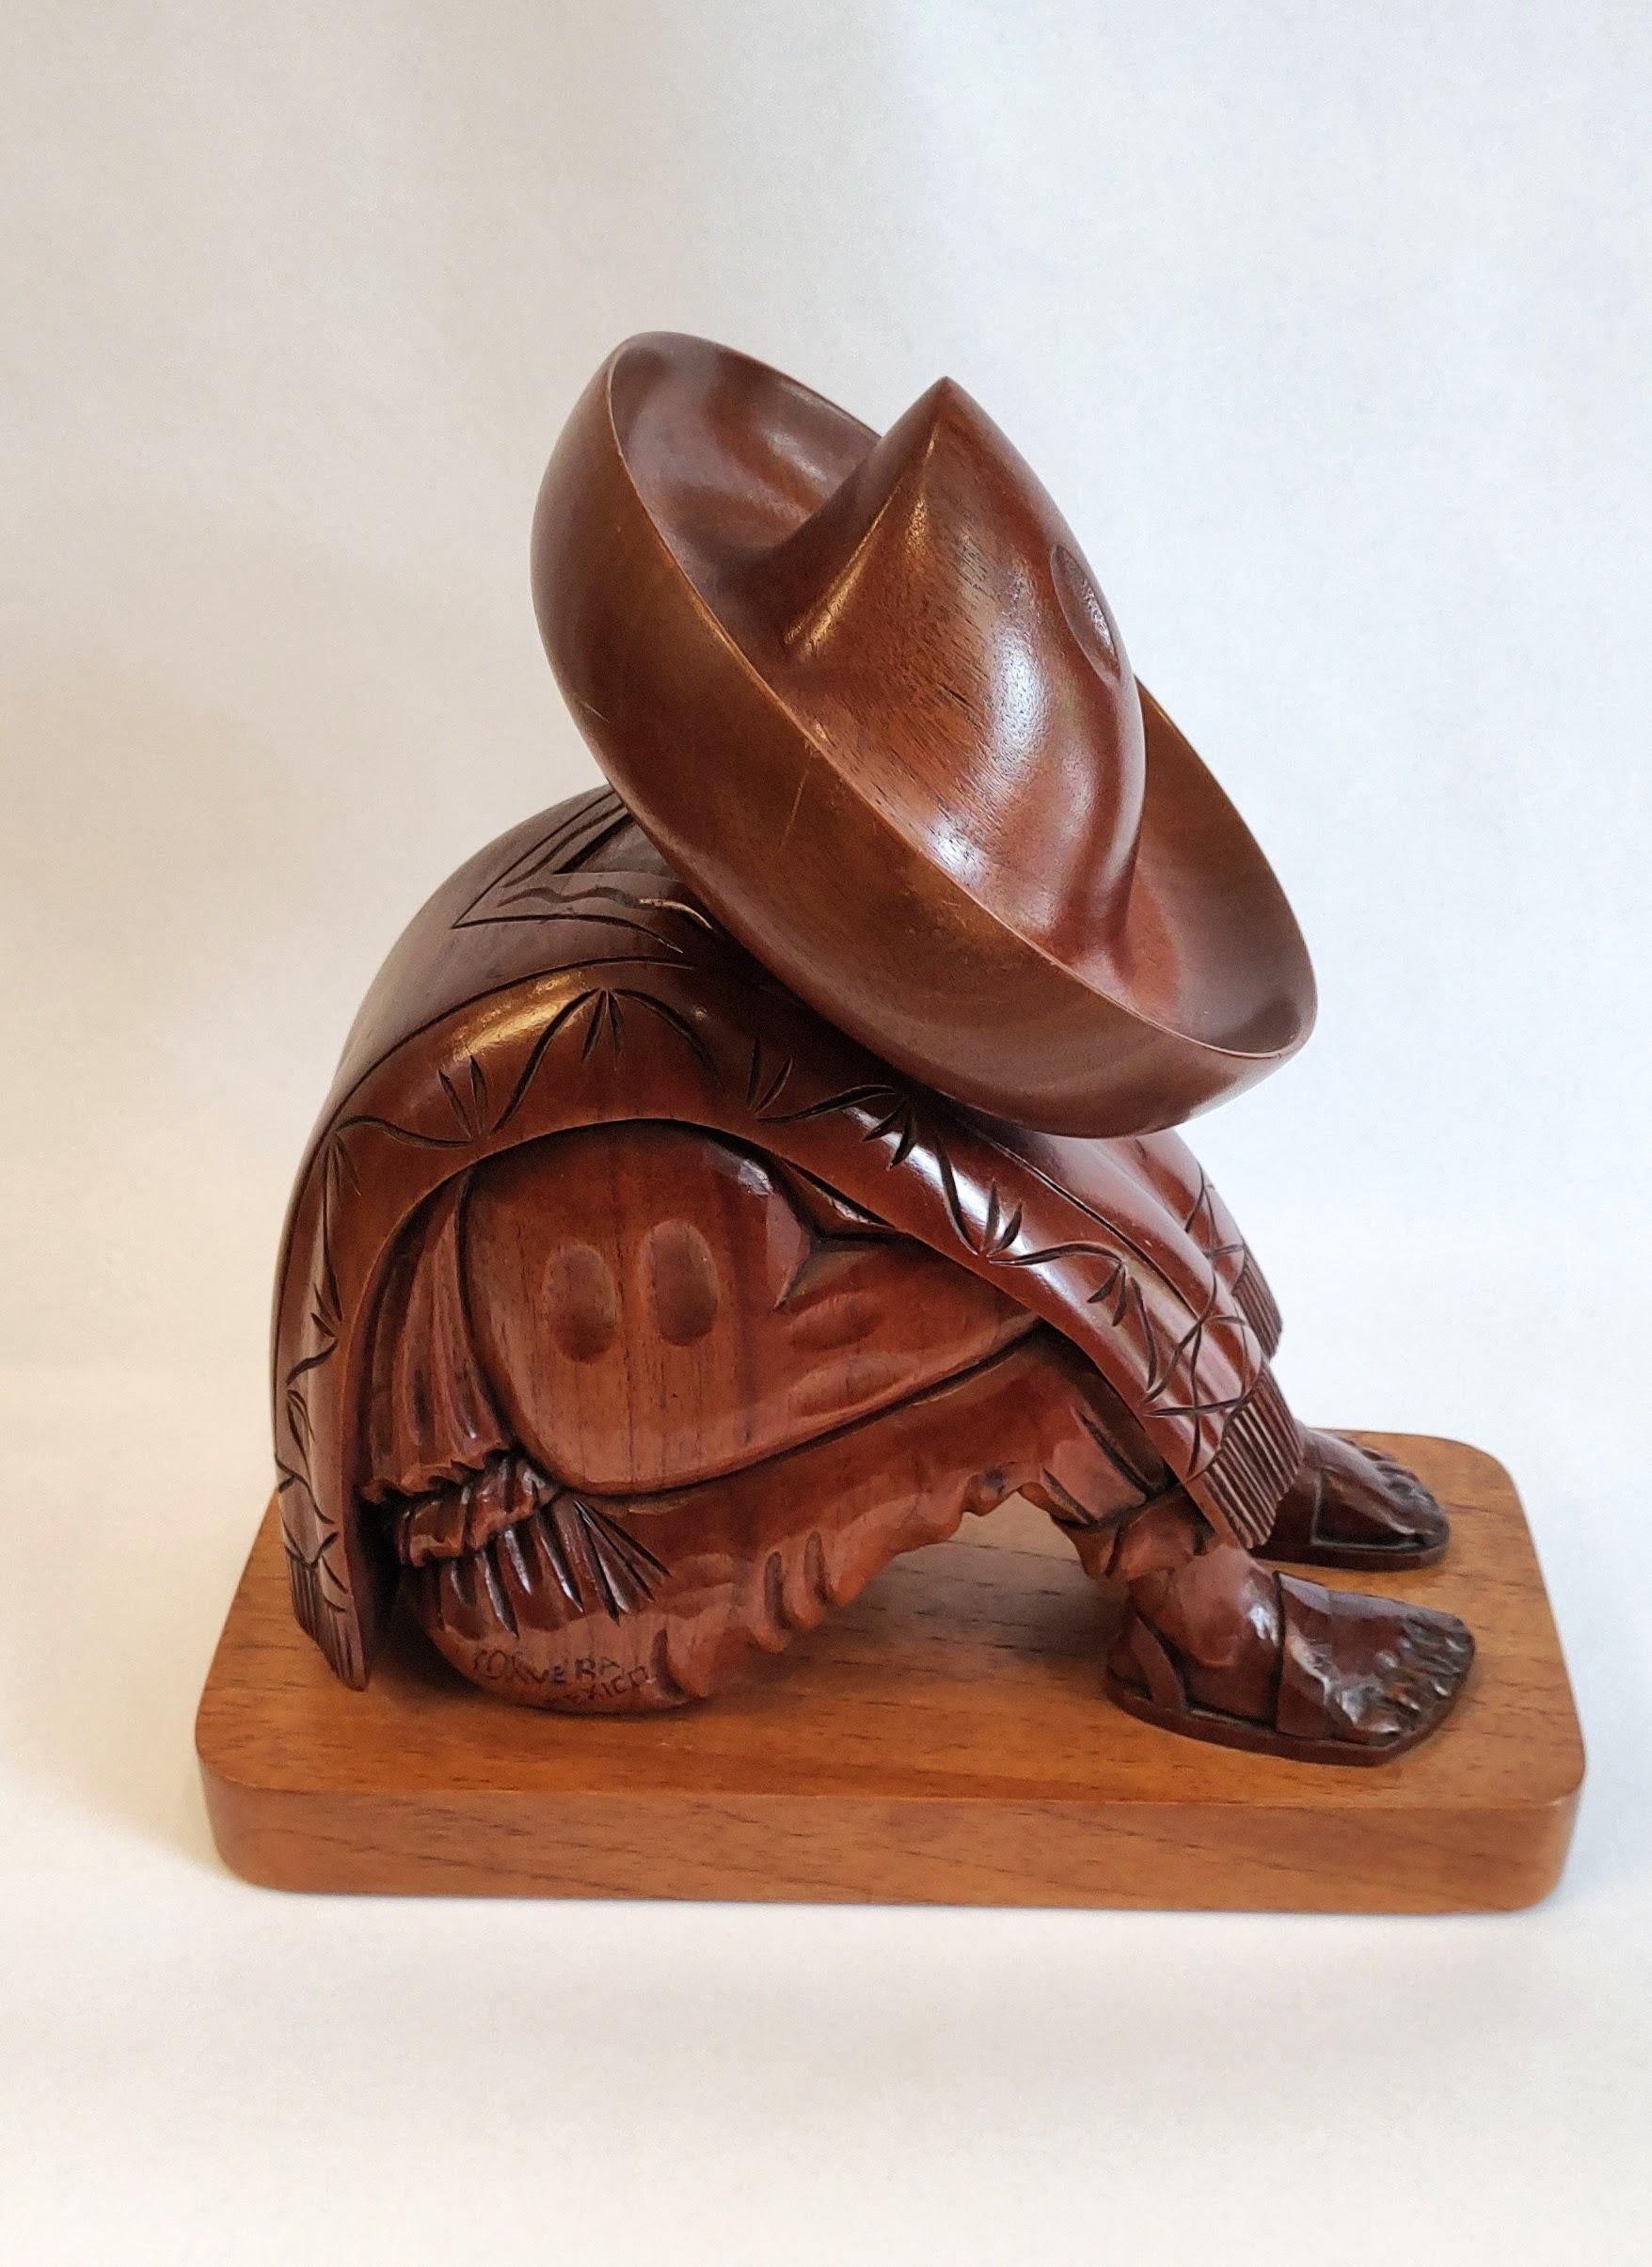 Beautifully hand carved sculpture of sleeping man with large 